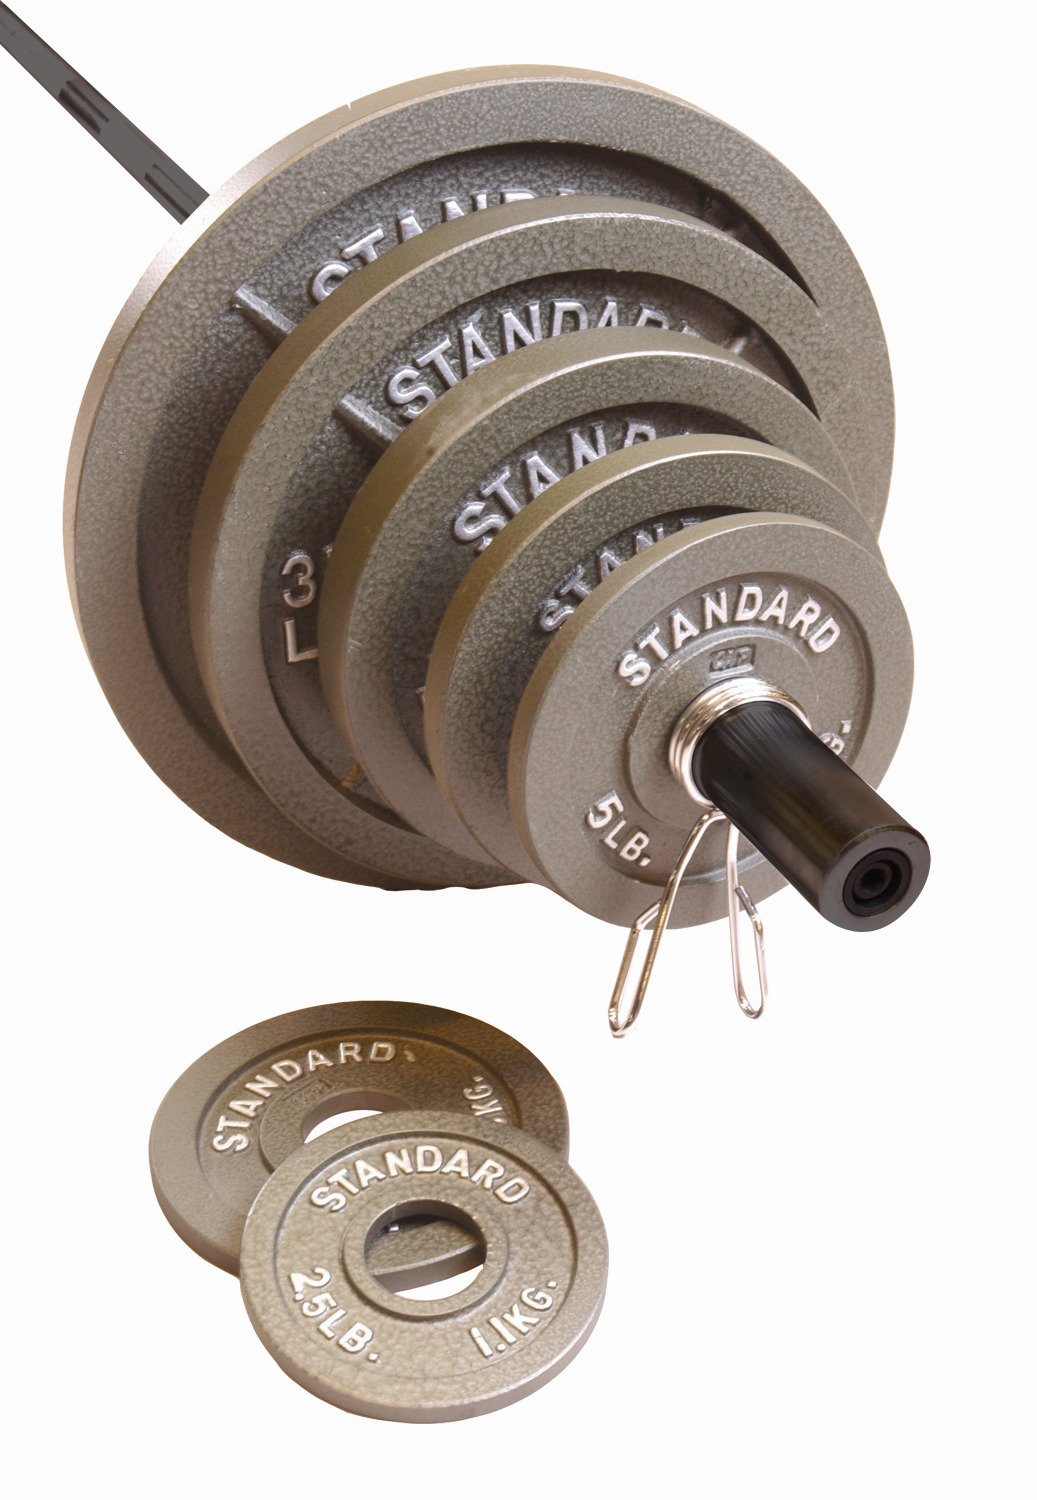 How much does a standard barbell weigh?